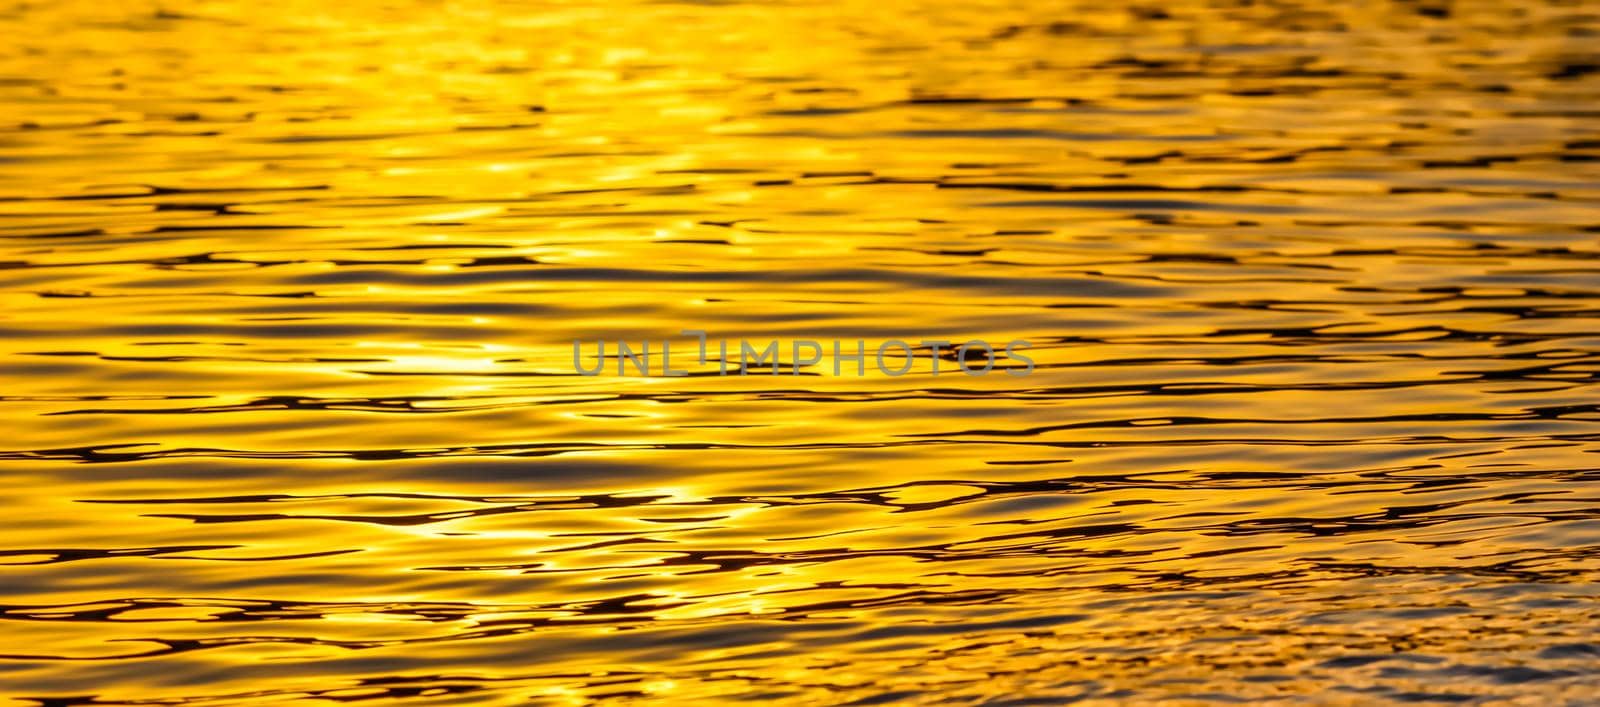 Golden sea waves in sunset glow as surface background. Summer holidays concept by Olayola